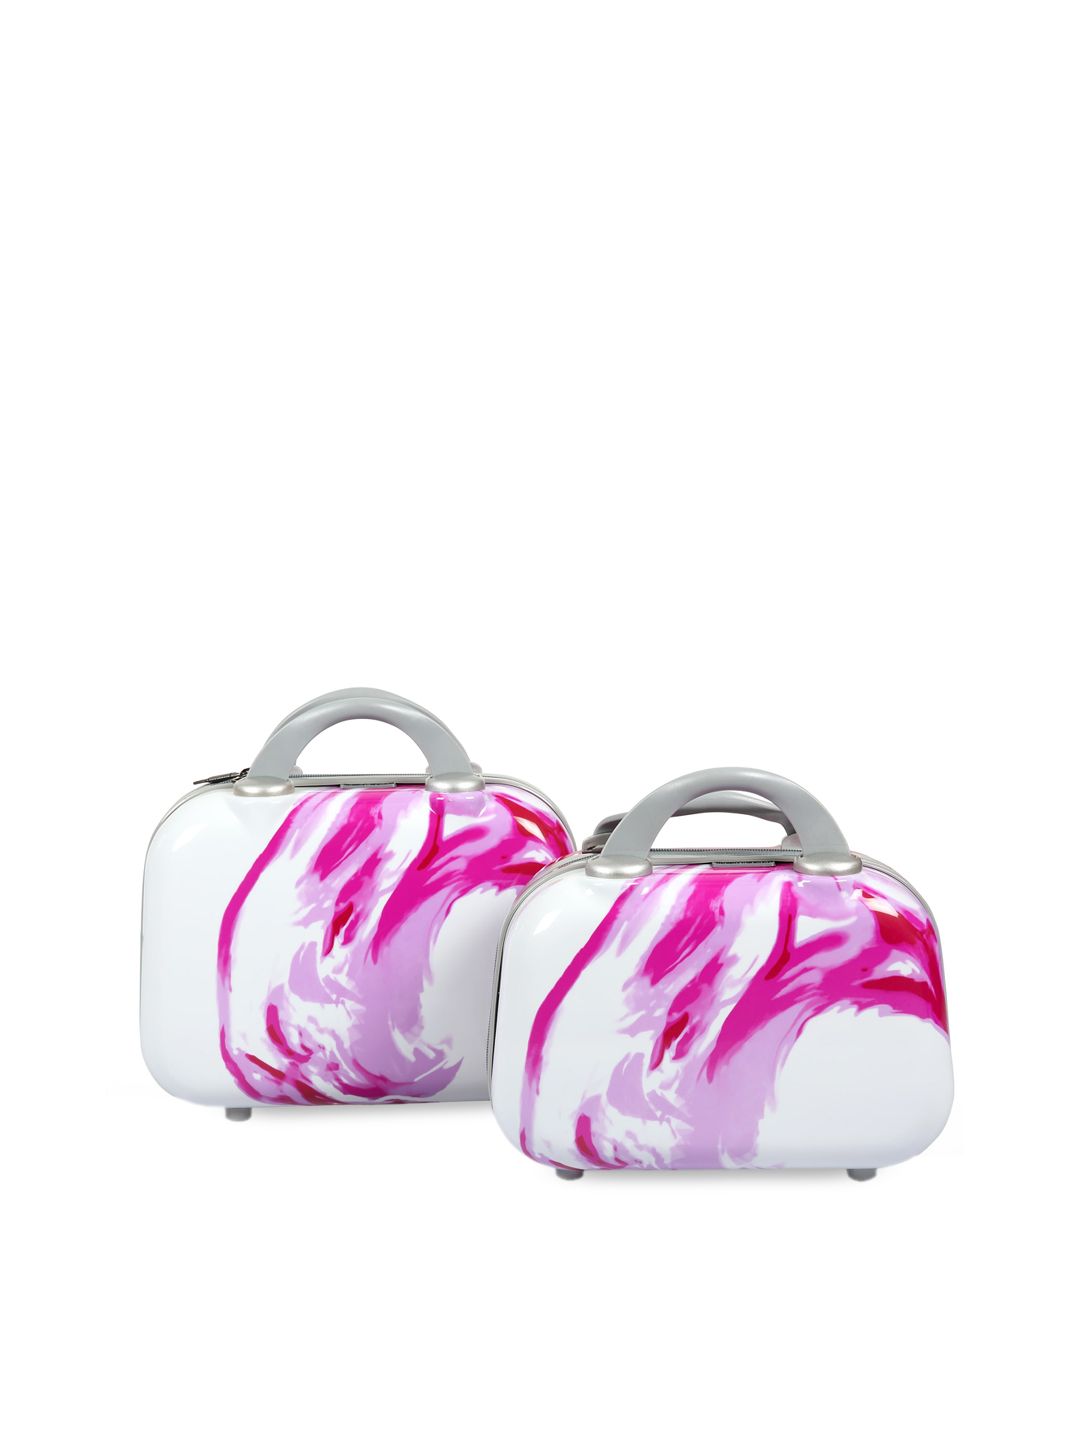 Polo Class Set of 2 Pink Printed Travel Luggage Vanity Bag Price in India